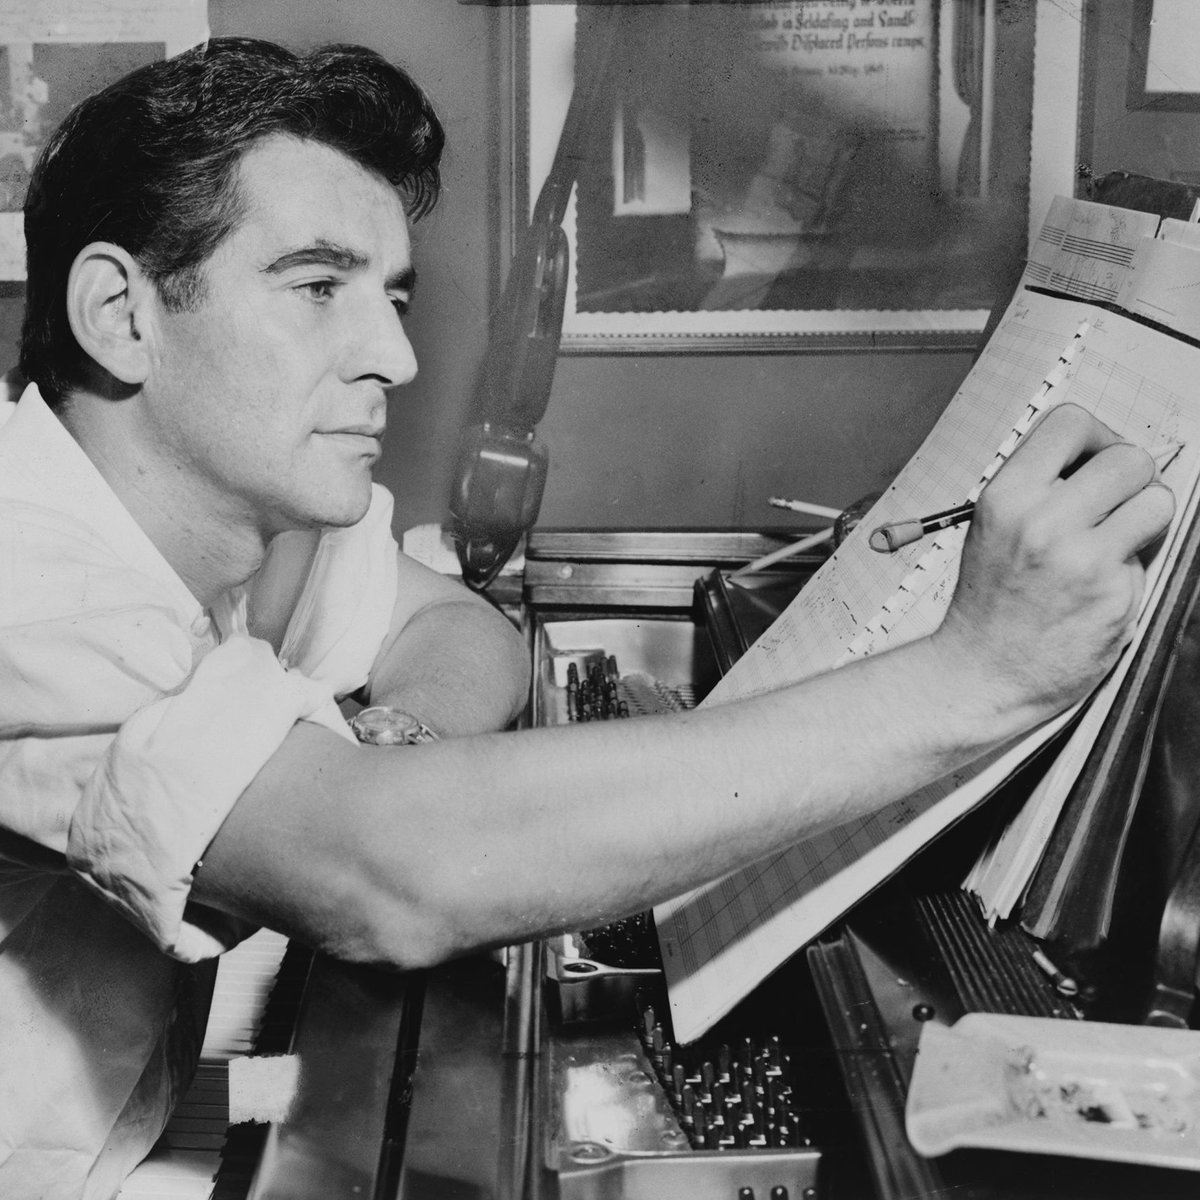 Happy #NationalCreativityDay! 'I sometimes do compose at the piano, and sometimes at a desk, and sometimes in airports, and sometimes walking along the street; but mostly I compose in bed, lying down, or on a sofa, lying down.' -Leonard Bernstein, 1957